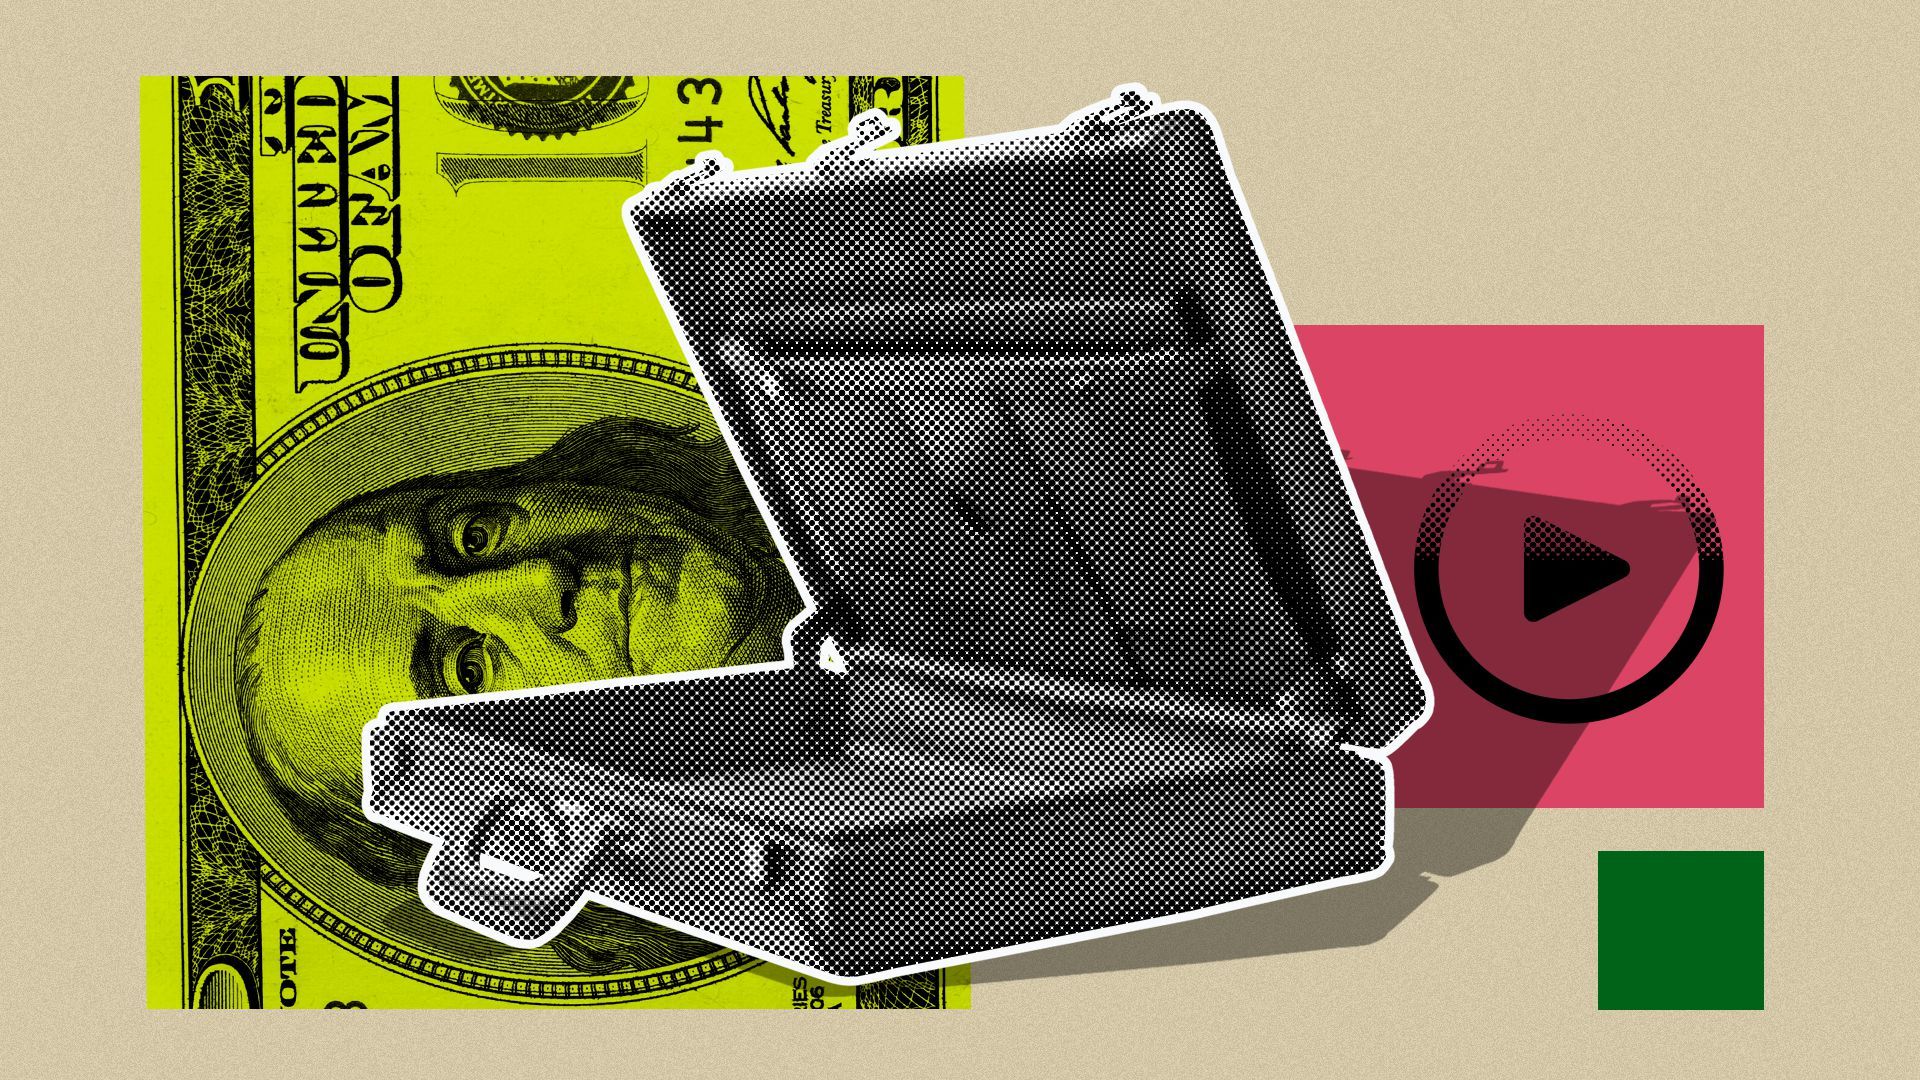 Illustration of a briefcase surrounded by a hundred dollar bill and a play button